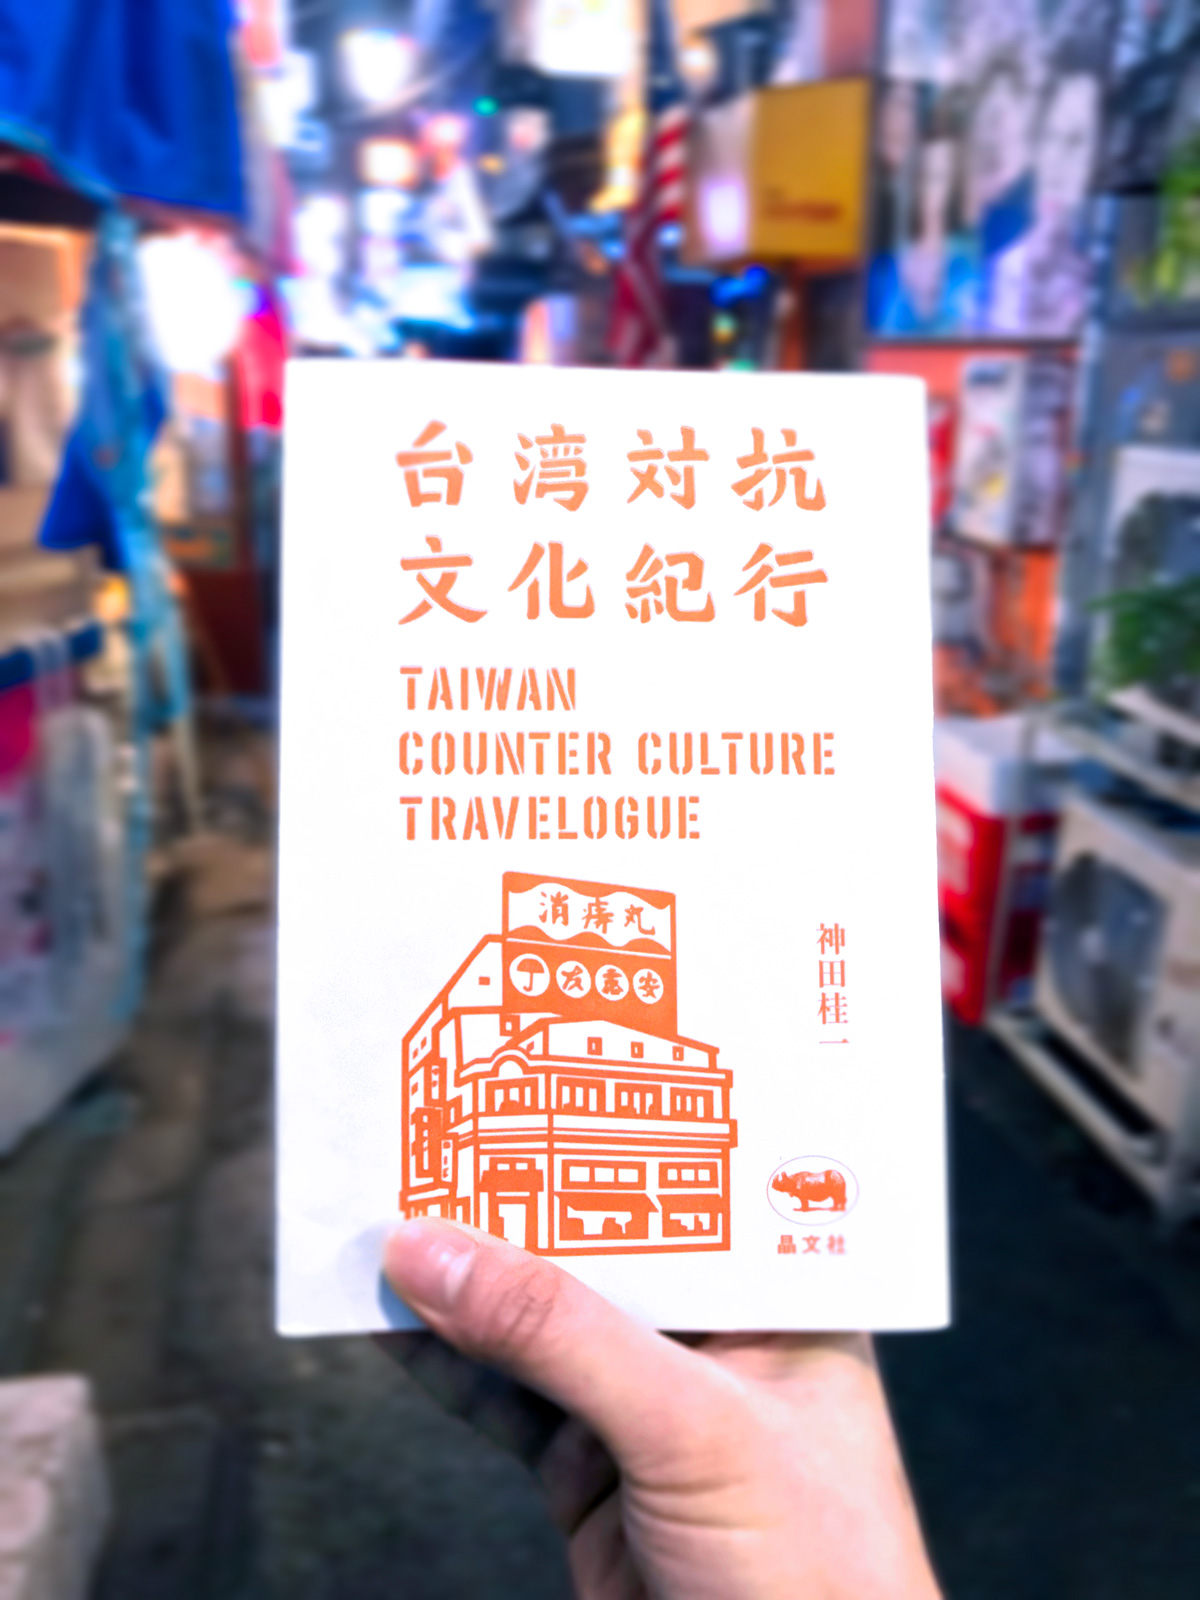 Taiwan Counter Culture Exchange Travelogue